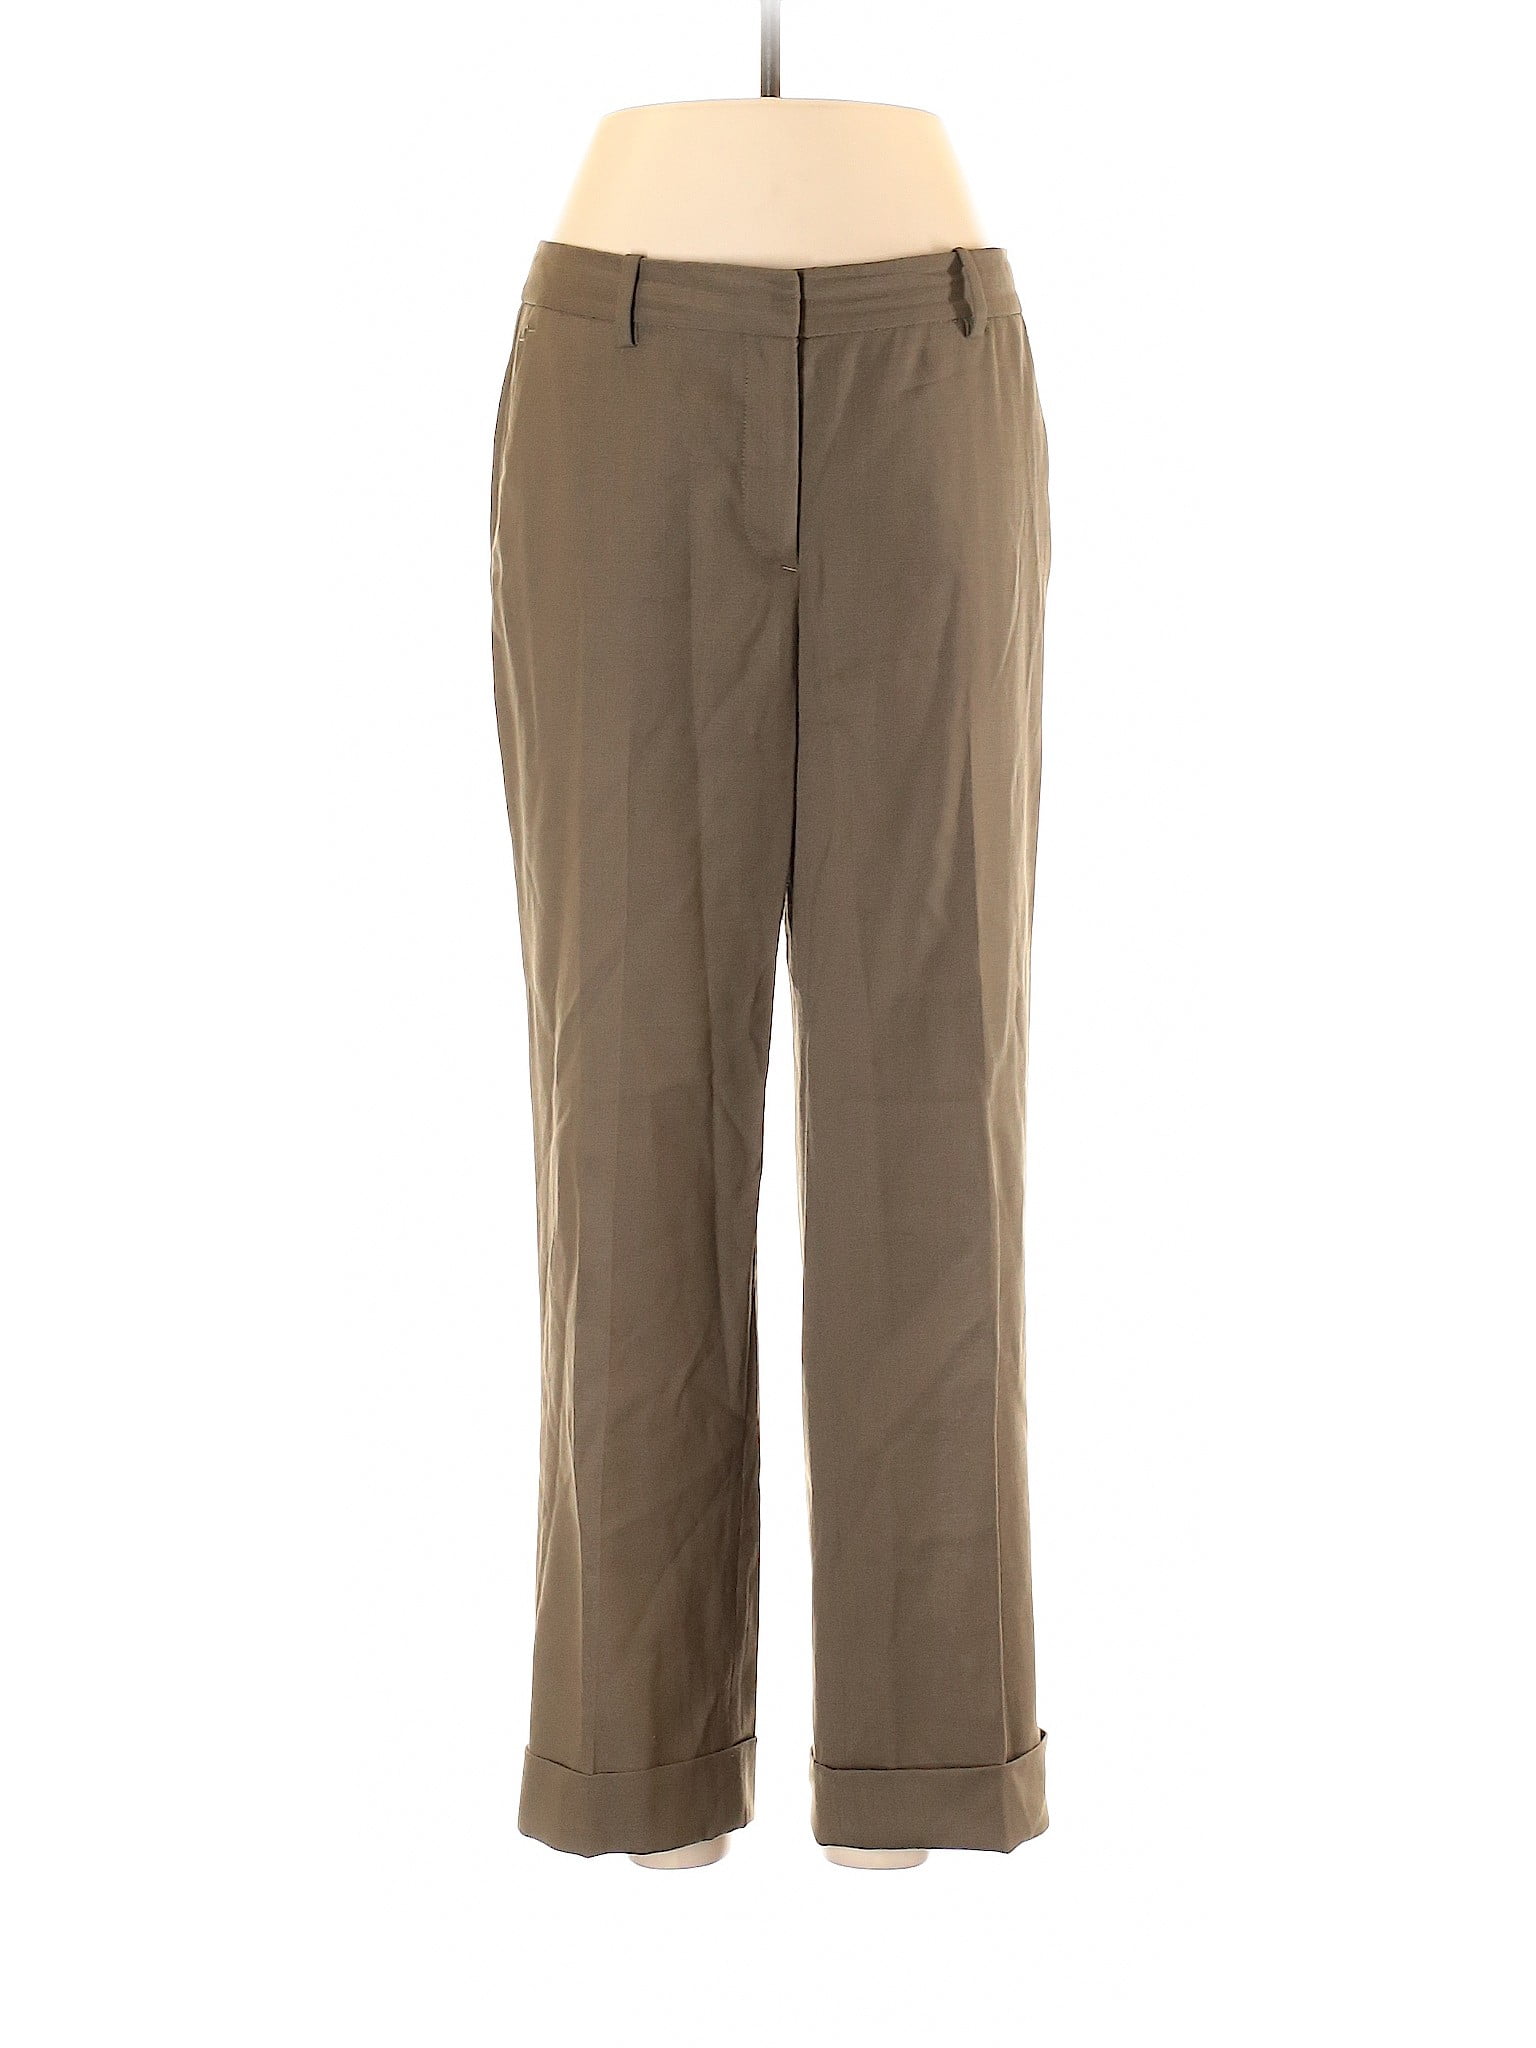 Theory - Pre-Owned Theory Women's Size 4 Wool Pants - Walmart.com ...